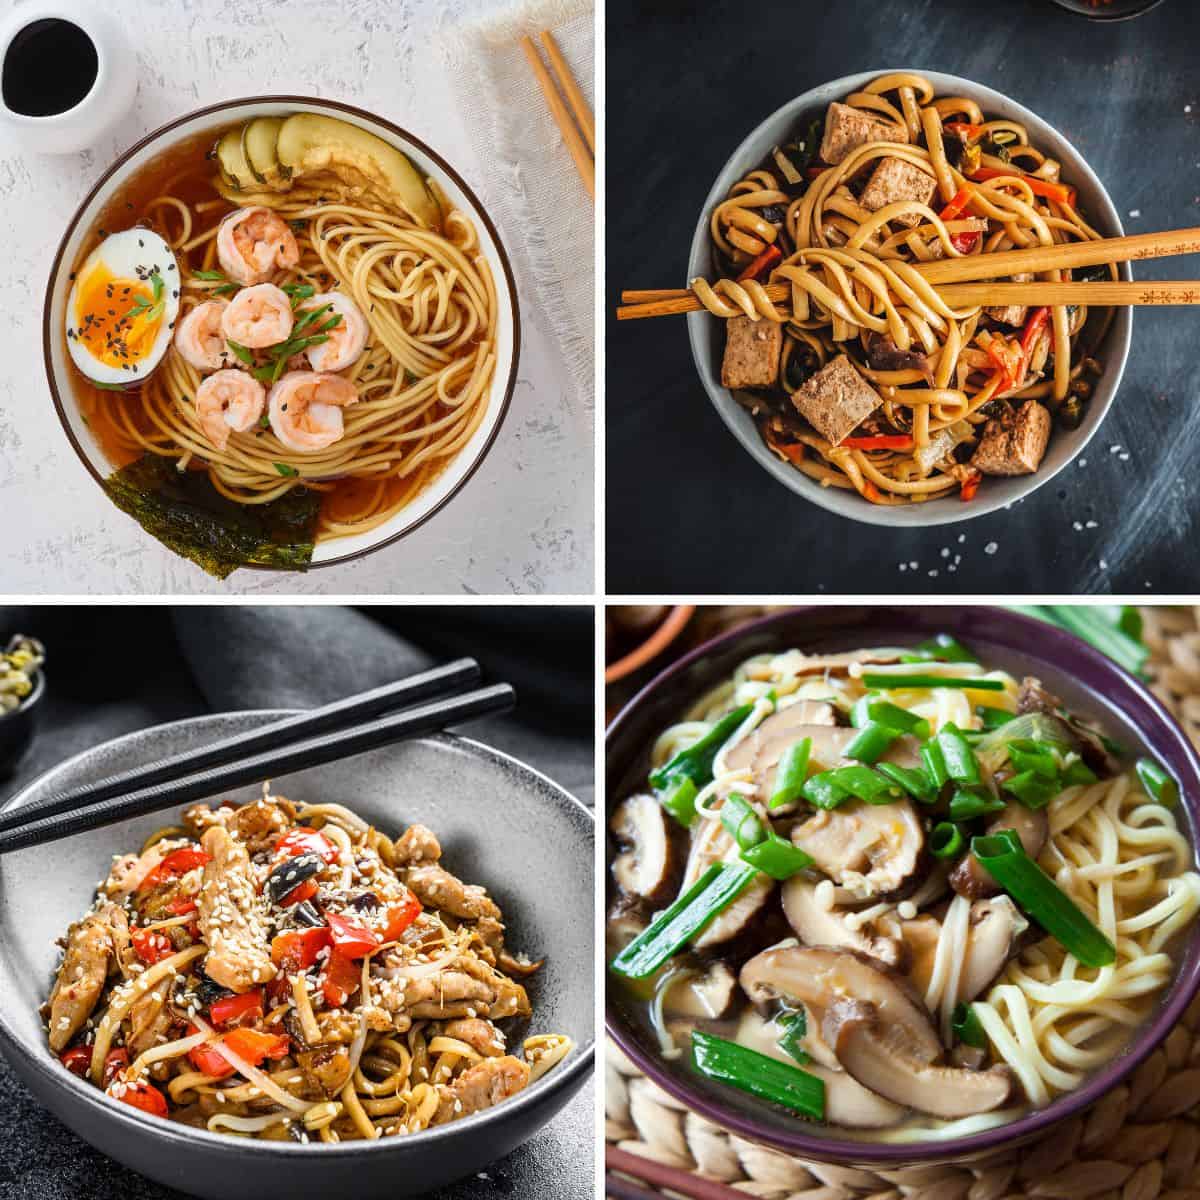 Pictures of egg noodle dishes.